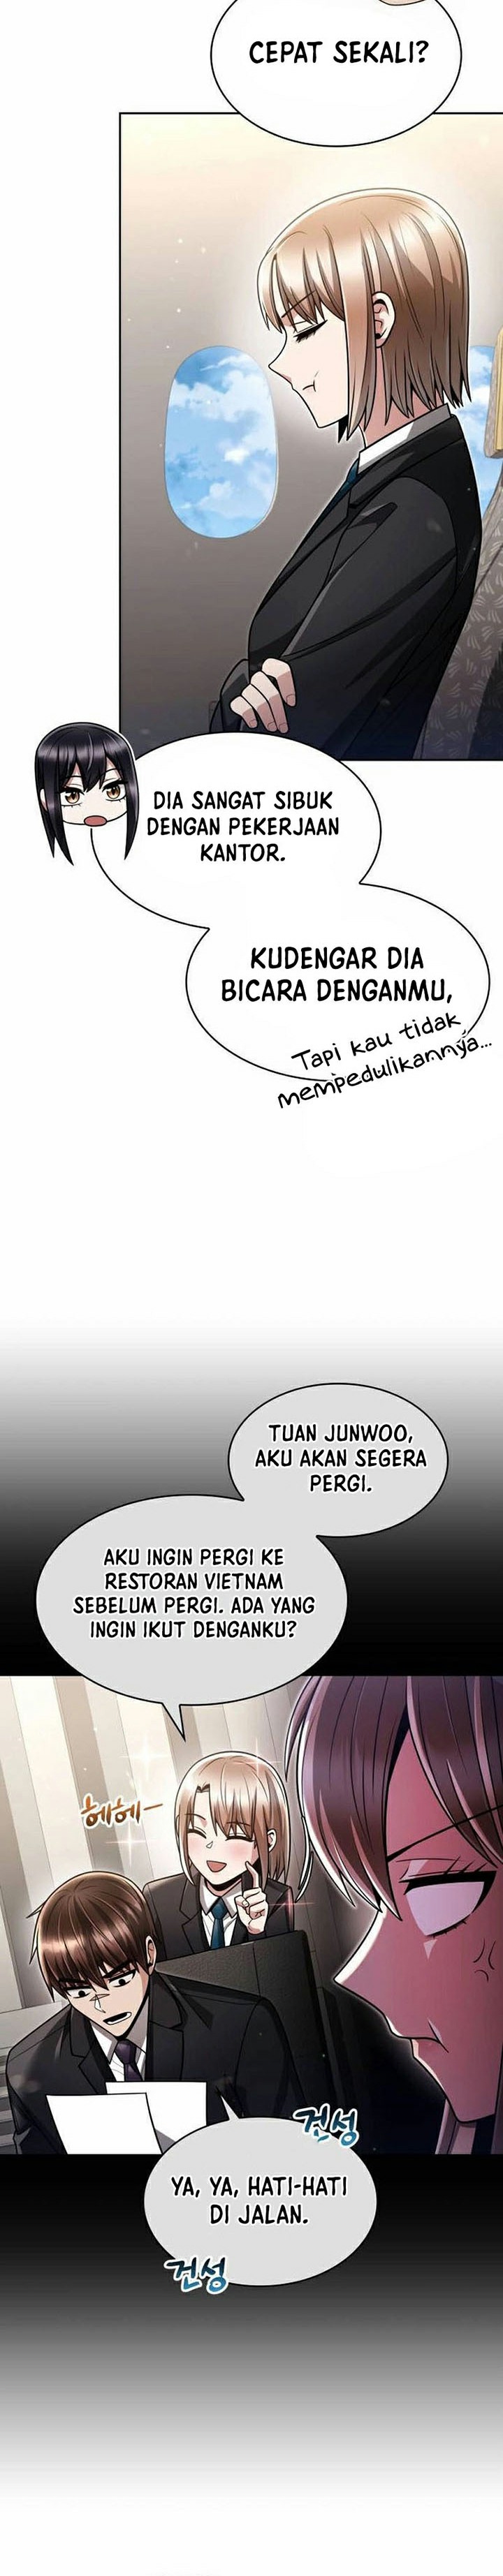 Dilarang COPAS - situs resmi www.mangacanblog.com - Komik clever cleaning life of the returned genius hunter 062 - chapter 62 63 Indonesia clever cleaning life of the returned genius hunter 062 - chapter 62 Terbaru 10|Baca Manga Komik Indonesia|Mangacan